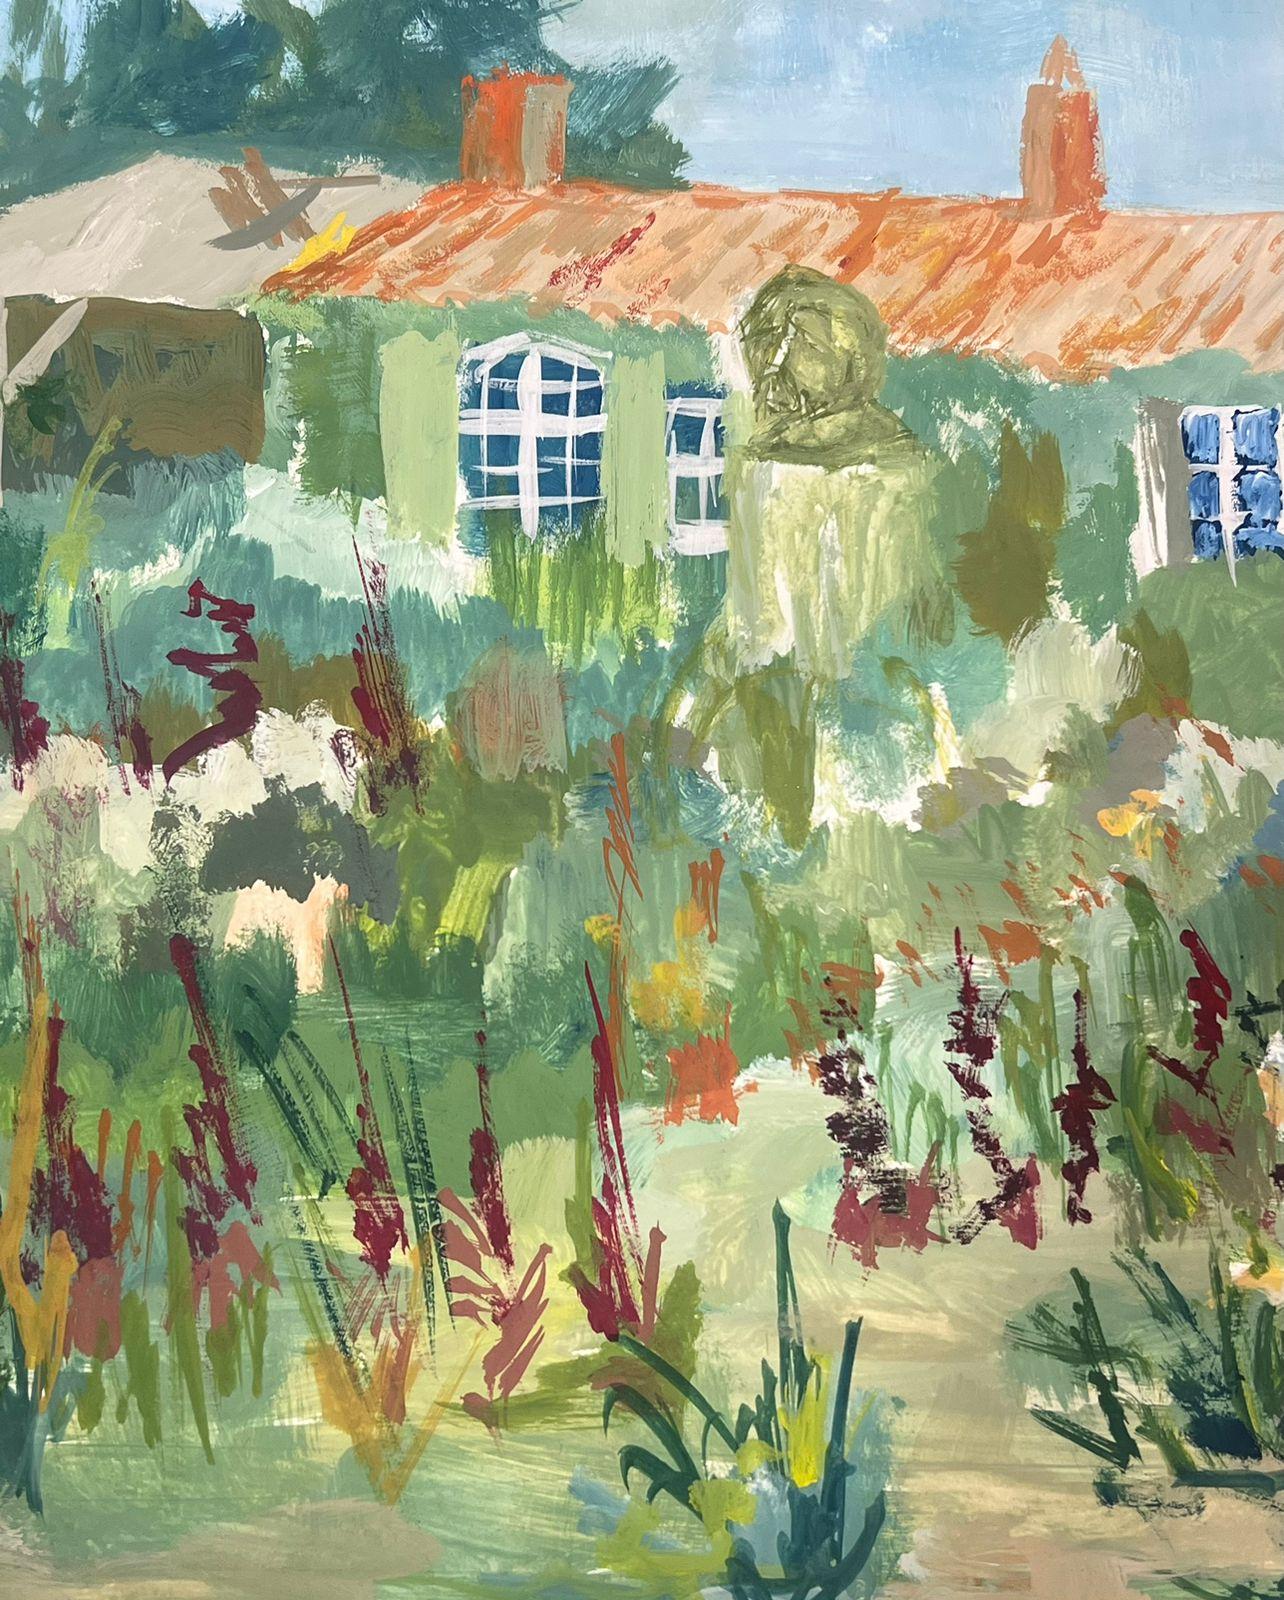 French Farmhouse in Landscape, does look rather like Monet's house at Giverny.  
by Bernard Labbe (French mid 20th century) 
original gouache on artist paper
size: 11.5 x 20.5 inches
condition: very good and ready to be enjoyed

provenance: the